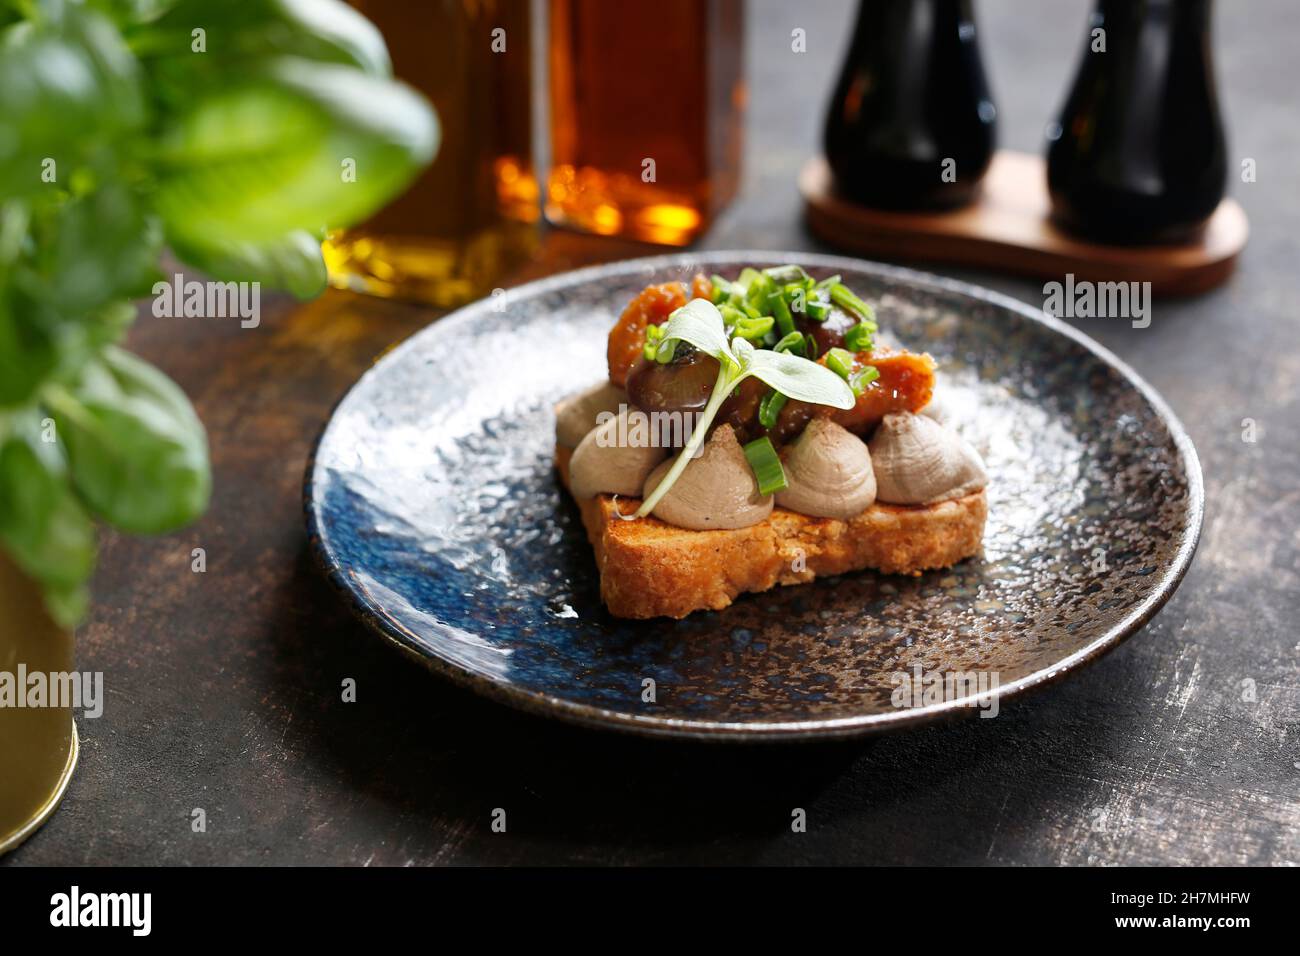 Sandwich with mousse, grilled mushrooms and chives. Appetizing dish. Culinary photography, a proposal to serve a meal. Stock Photo